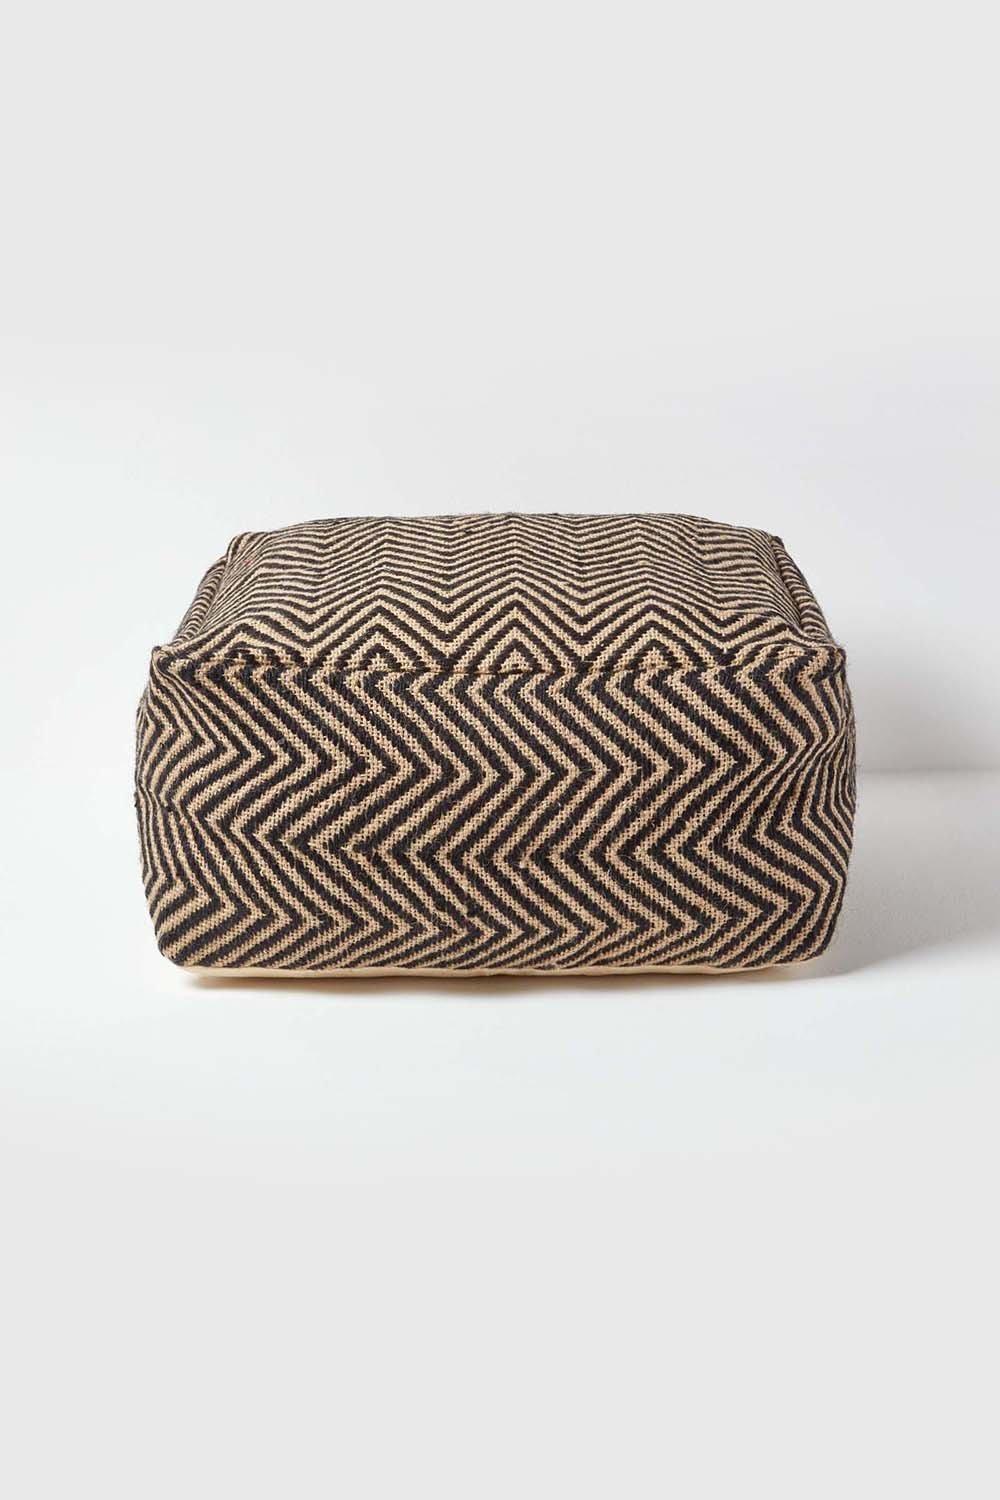 Patterned Large Square Pouffe